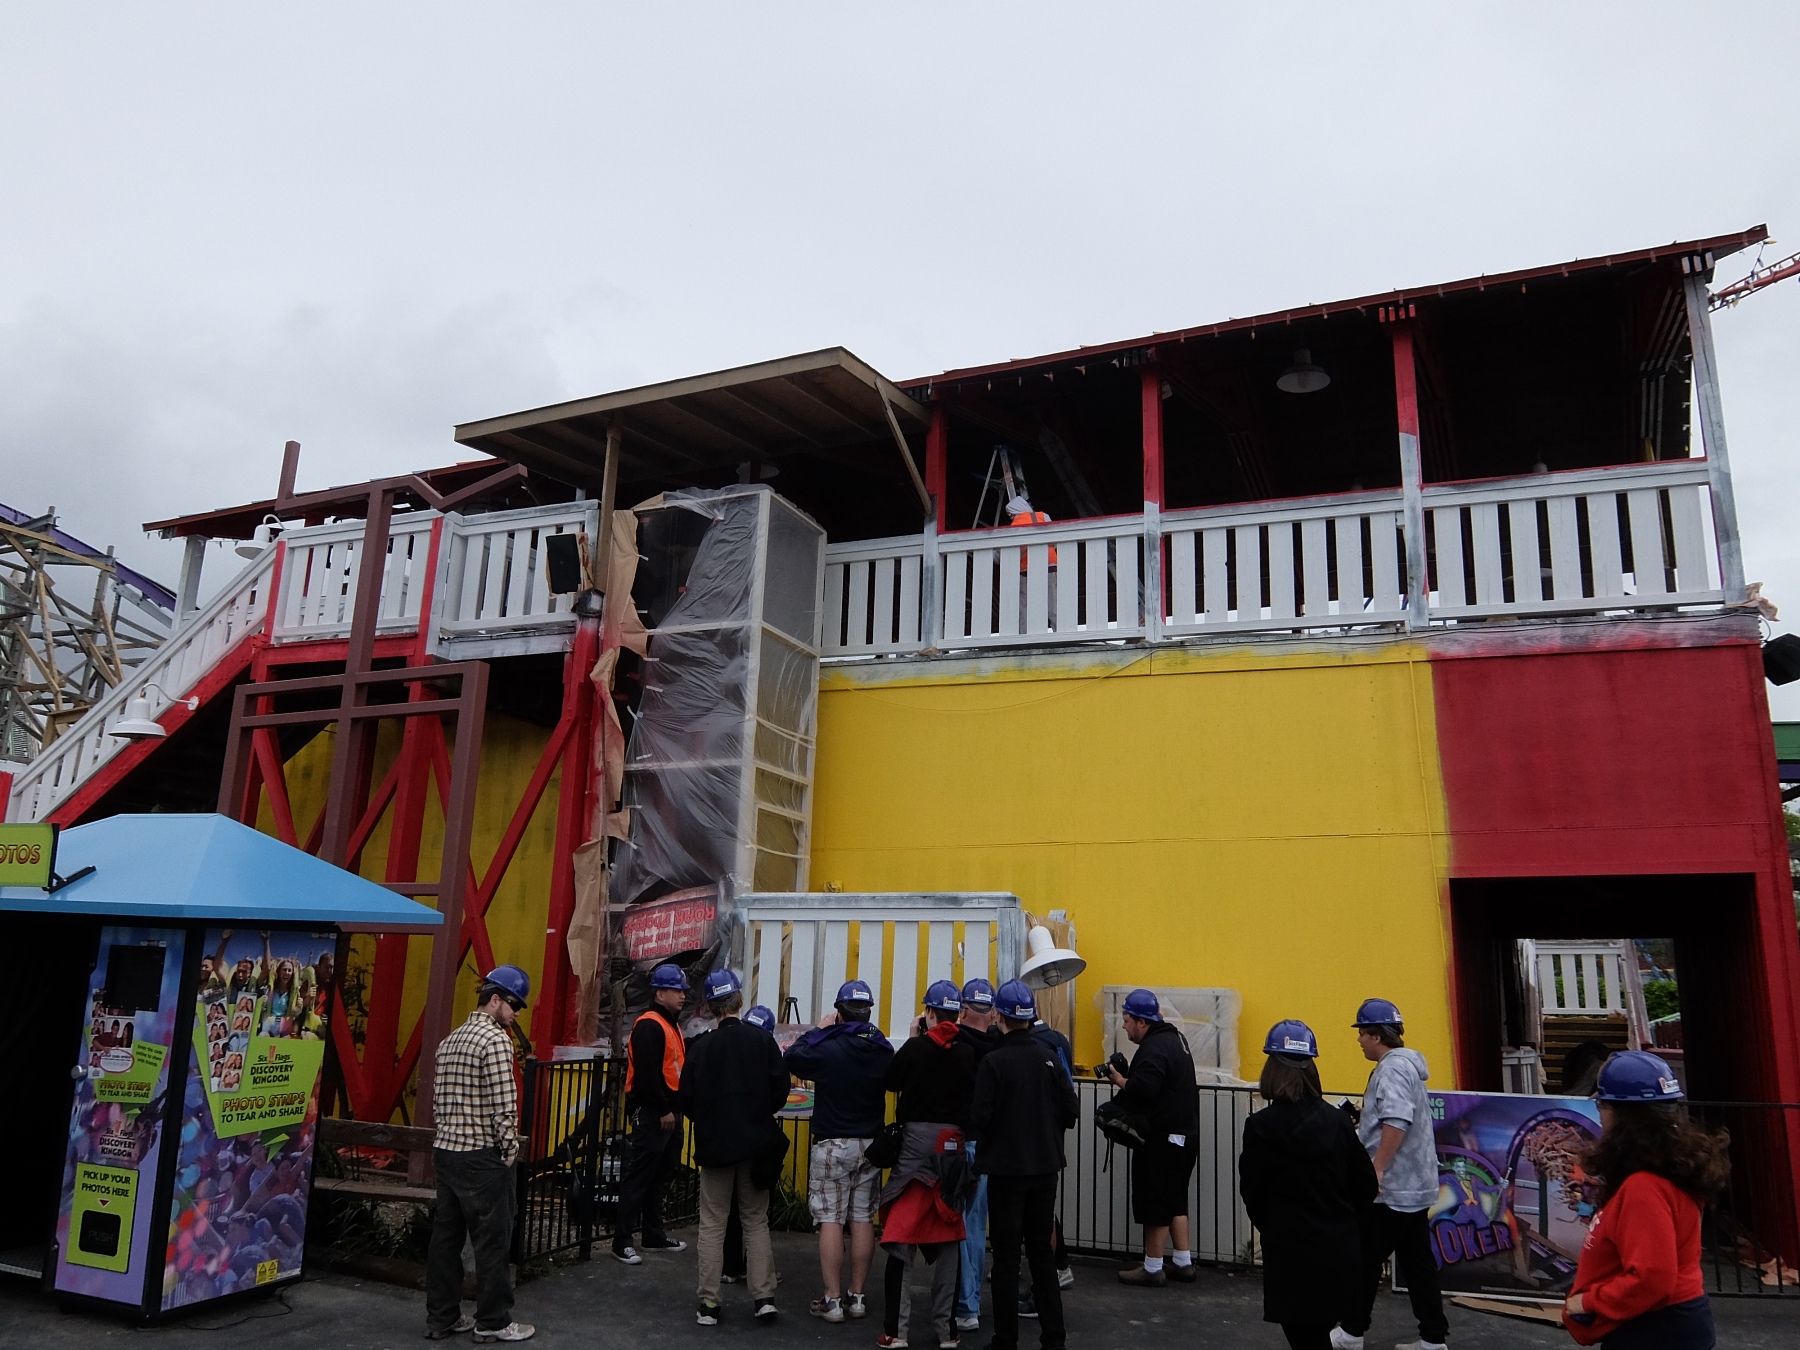 The ride entrance has been painted bright red and yellow, with more paint work still coming.